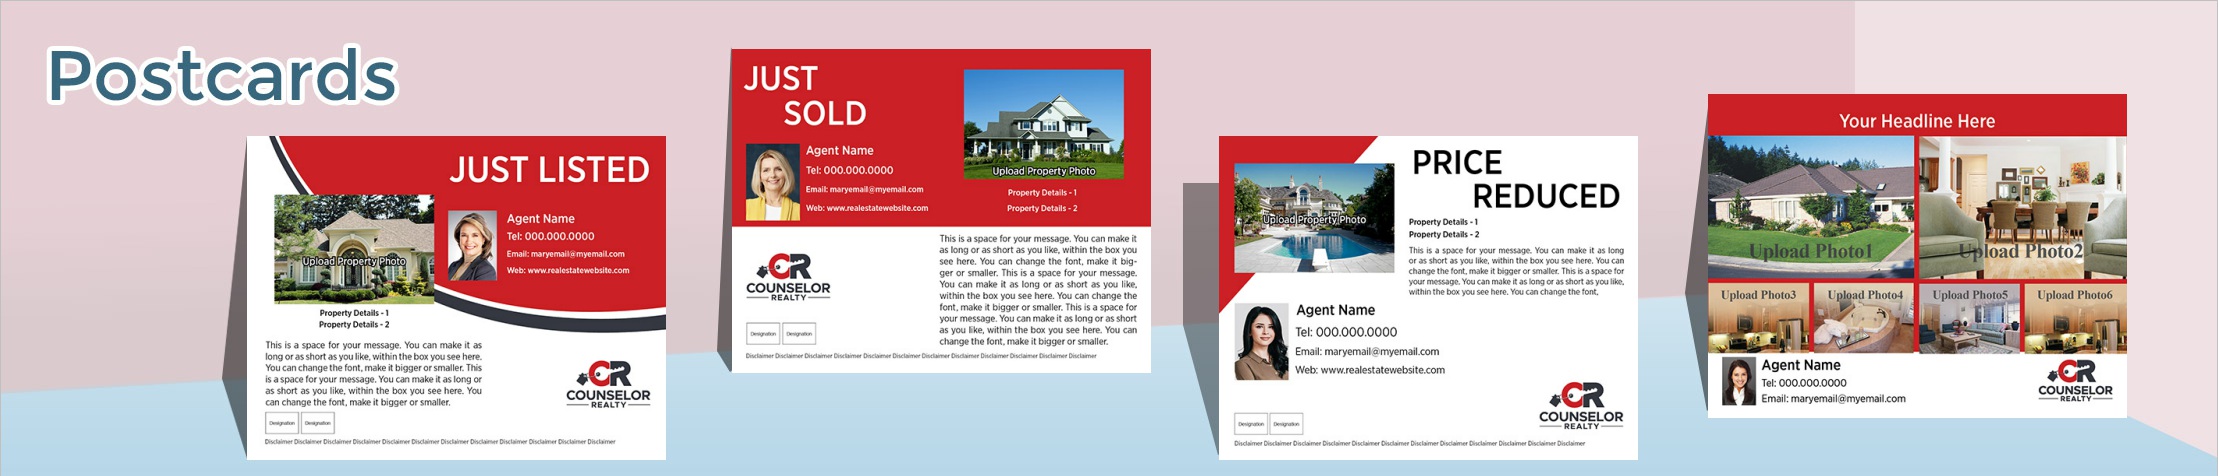 Counselor Realty Real Estate Postcards - Counselor Realty postcard templates and direct mail postcard mailing services | BestPrintBuy.com